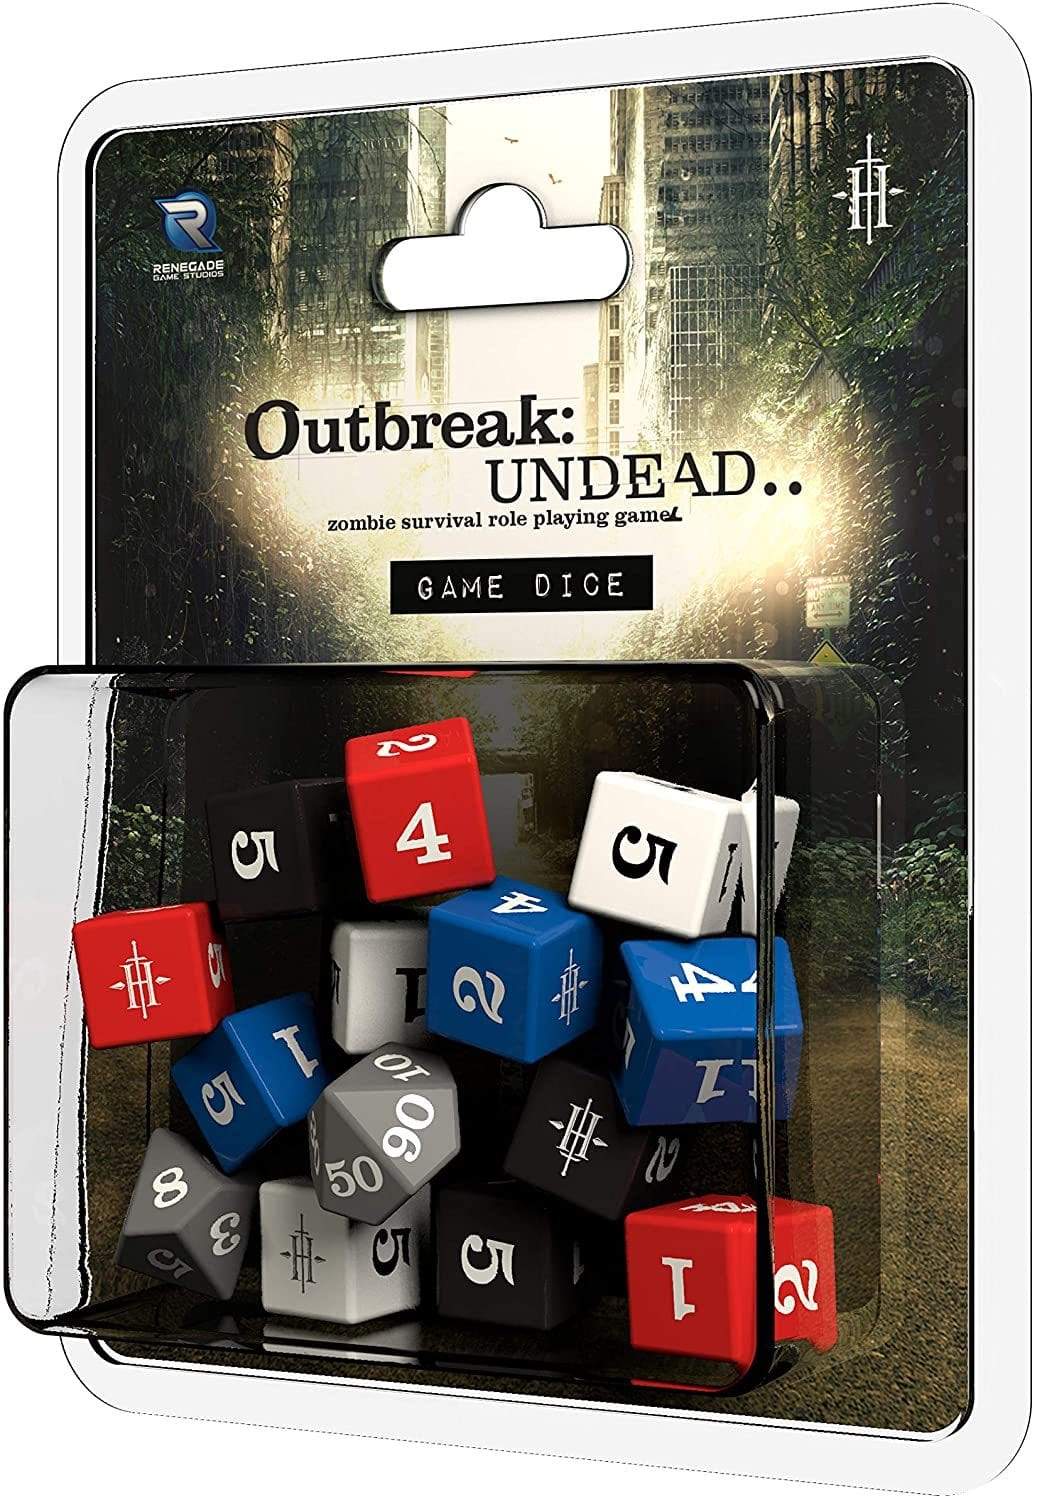 Outbreak Undead - Game Dice - Saltire Games